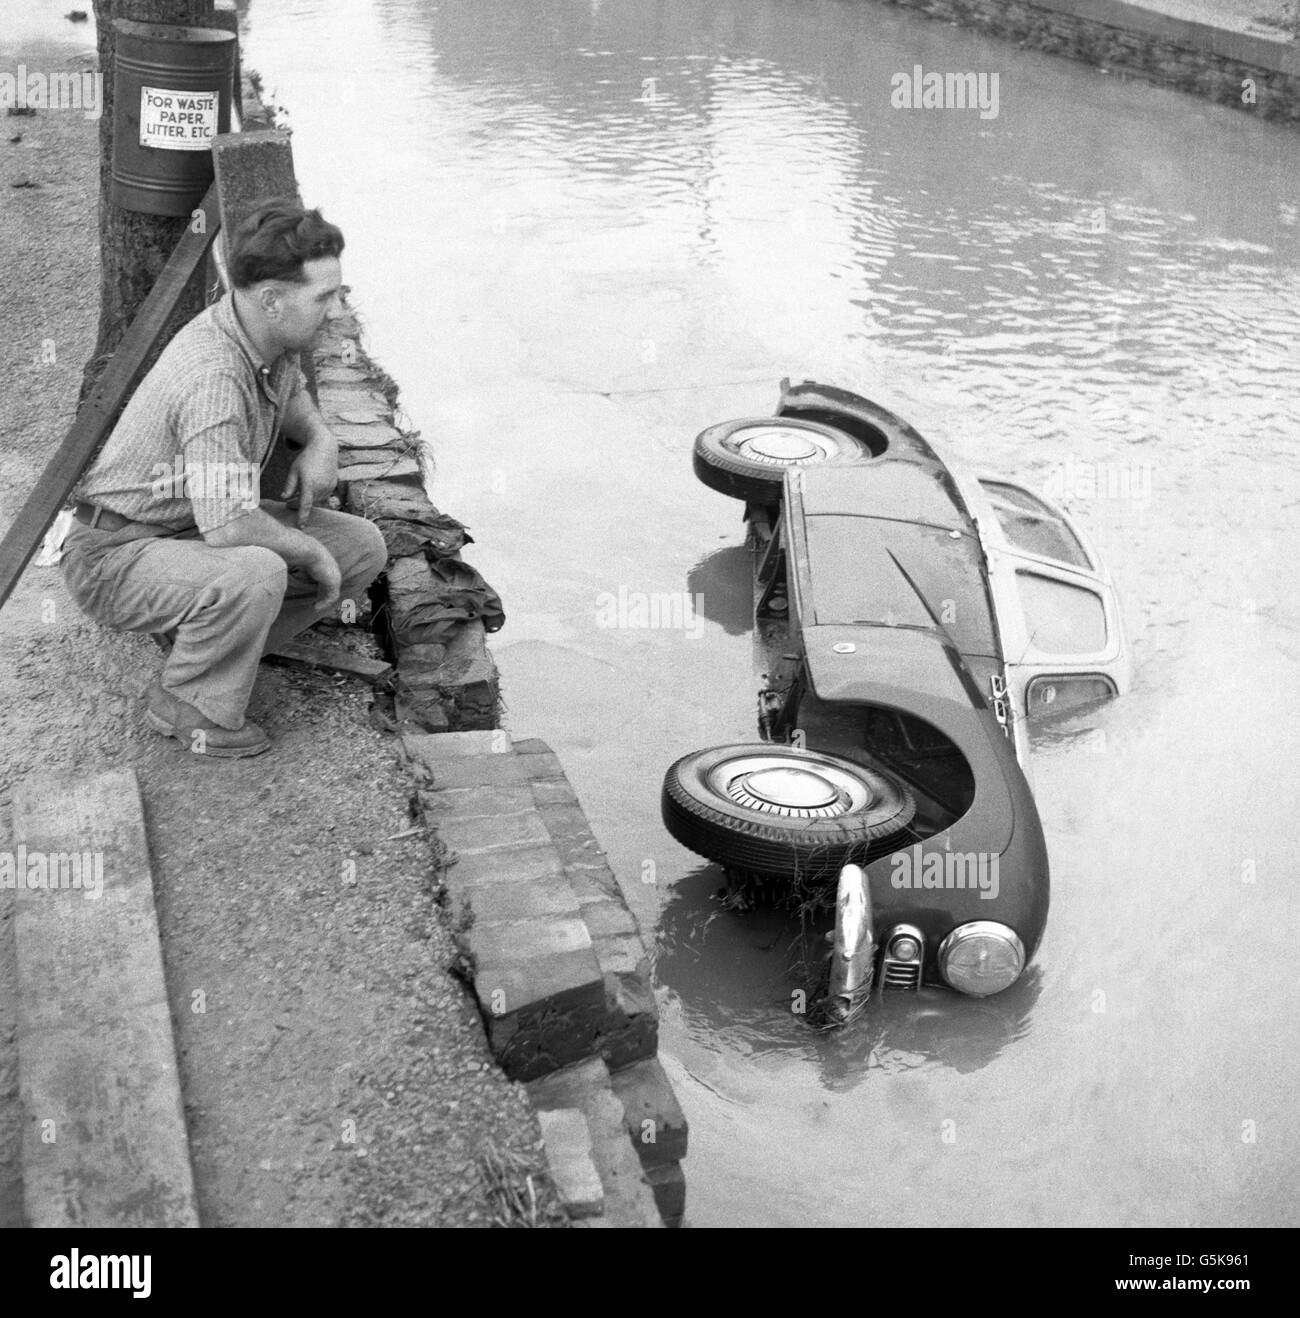 A Sunbeam Mk III car lies in a river after being swept several hundred yards from the centre of Horncastle, following severe floods. Stock Photo